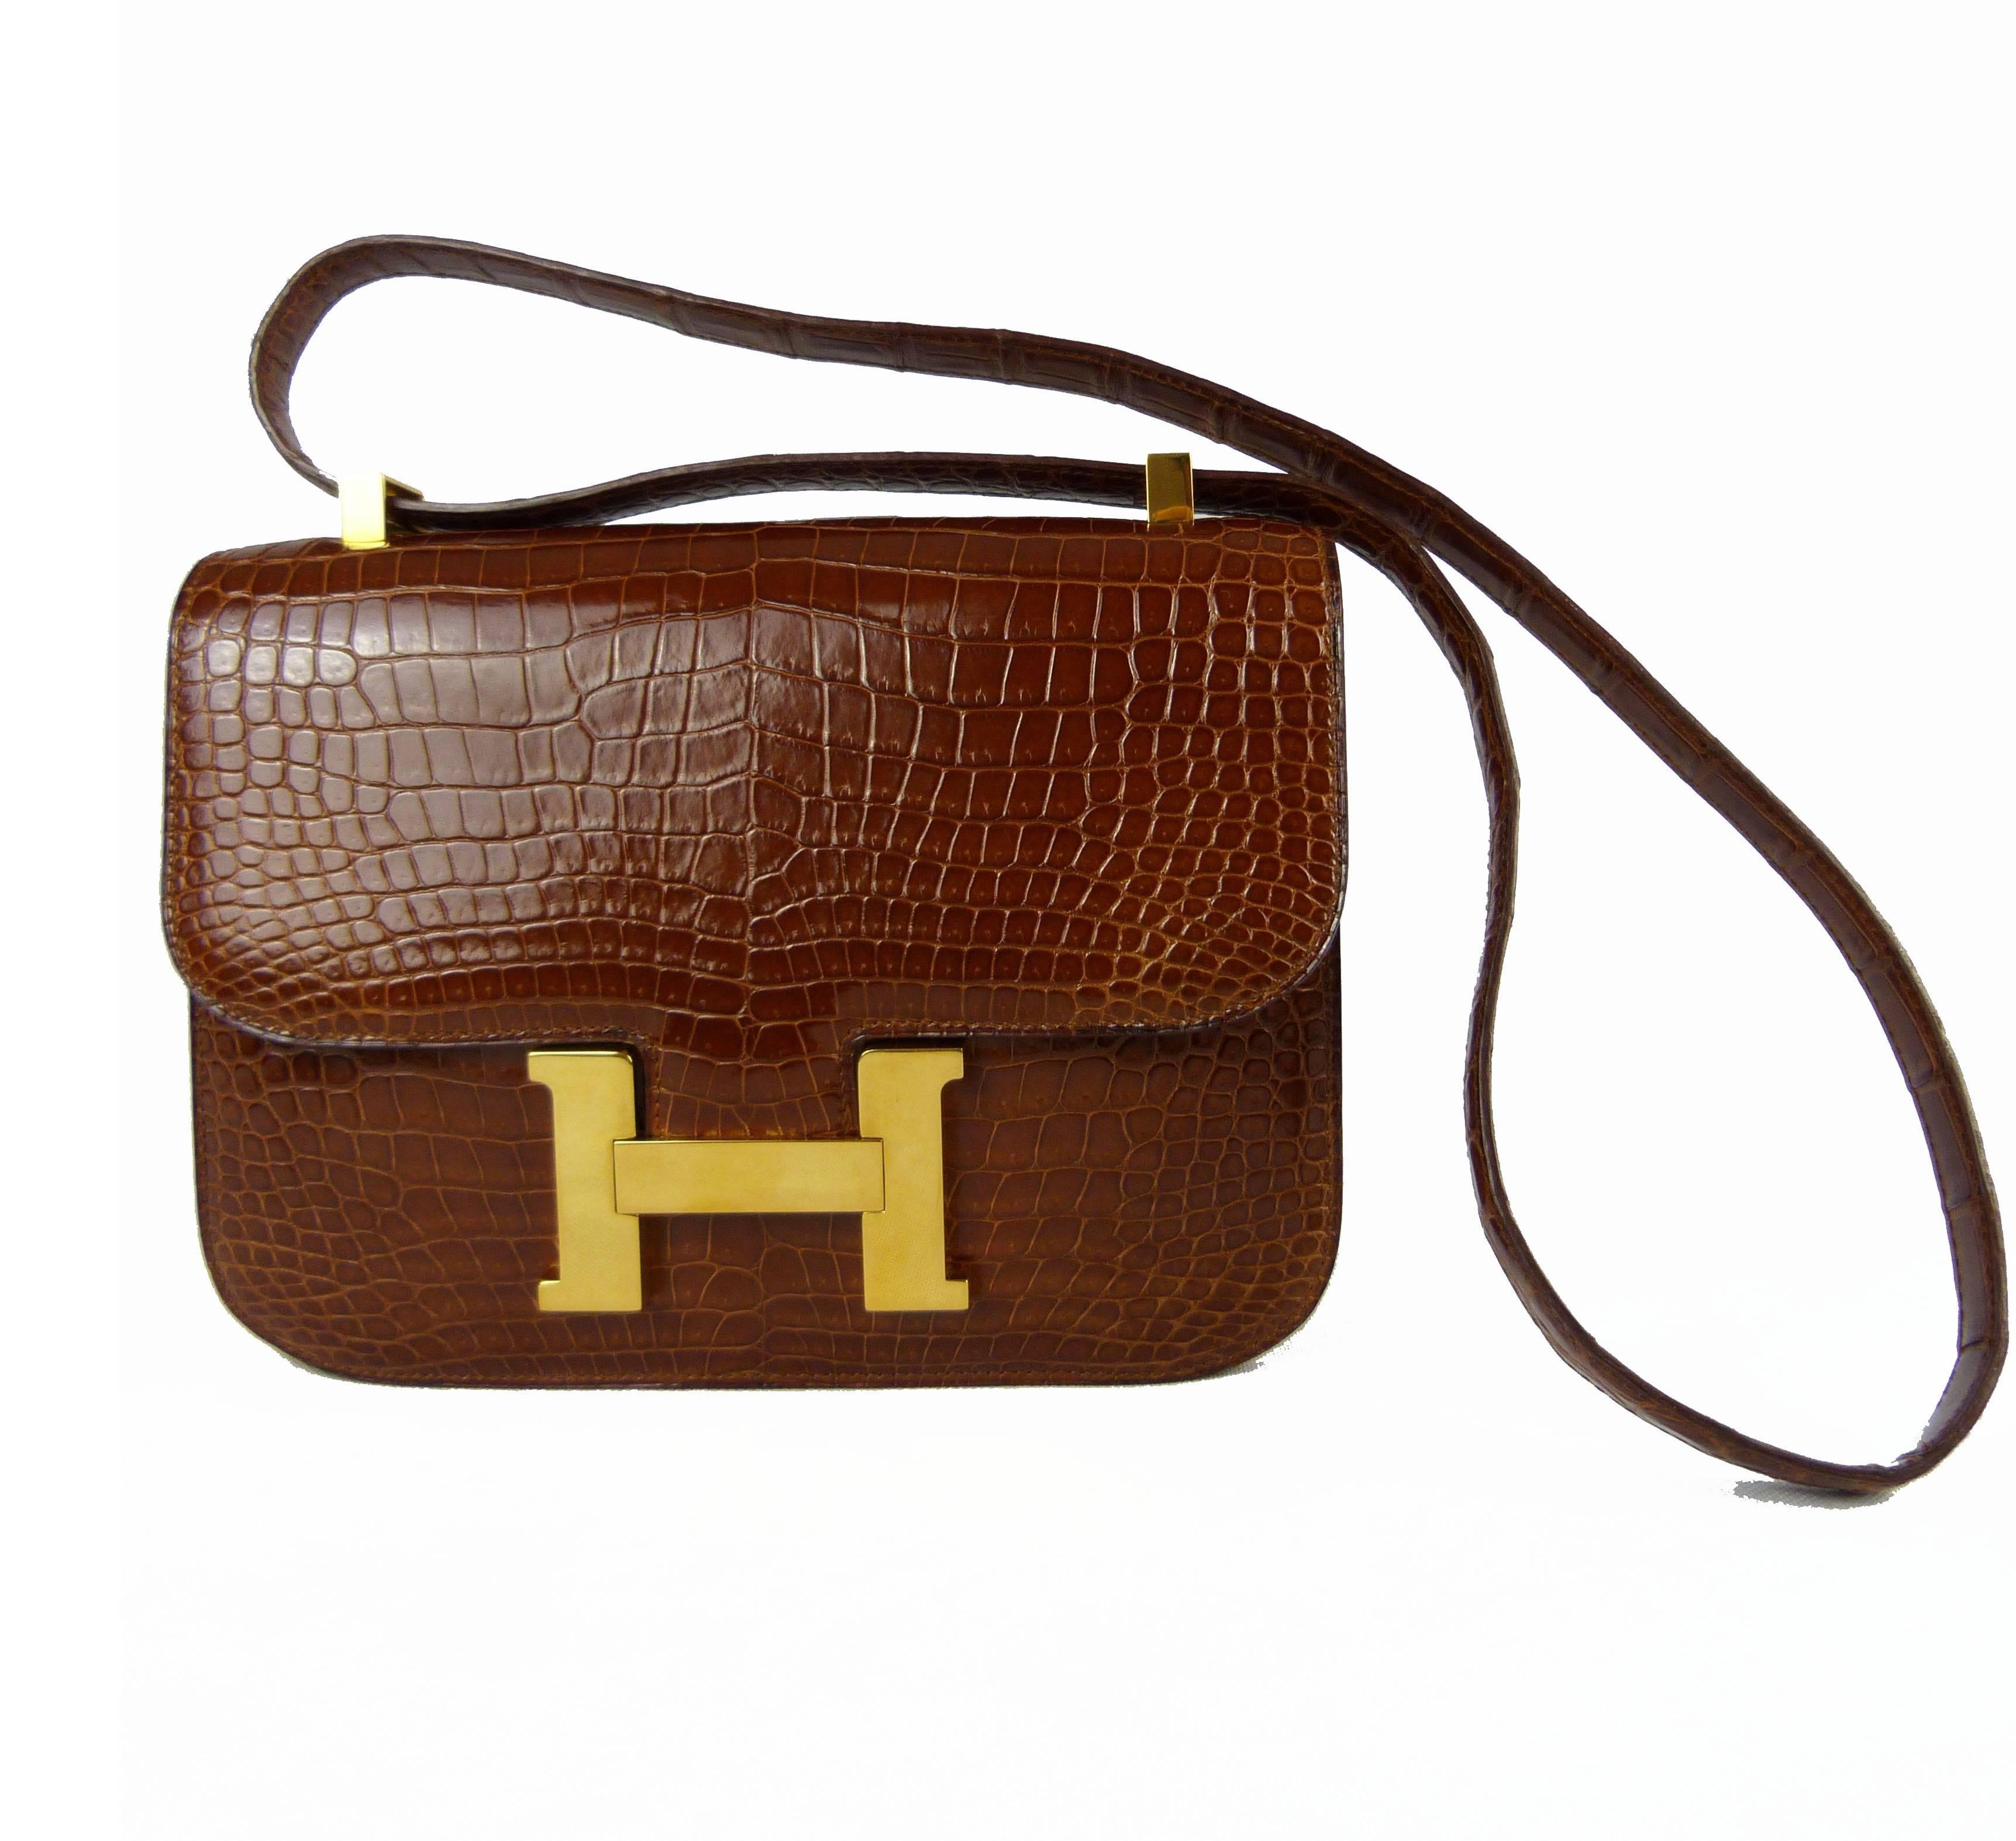 Brown crocodile Constance Bag Hermès made in France 1978

Constance bag 23cm in crocodilus porosus gold, gold plate clasp 